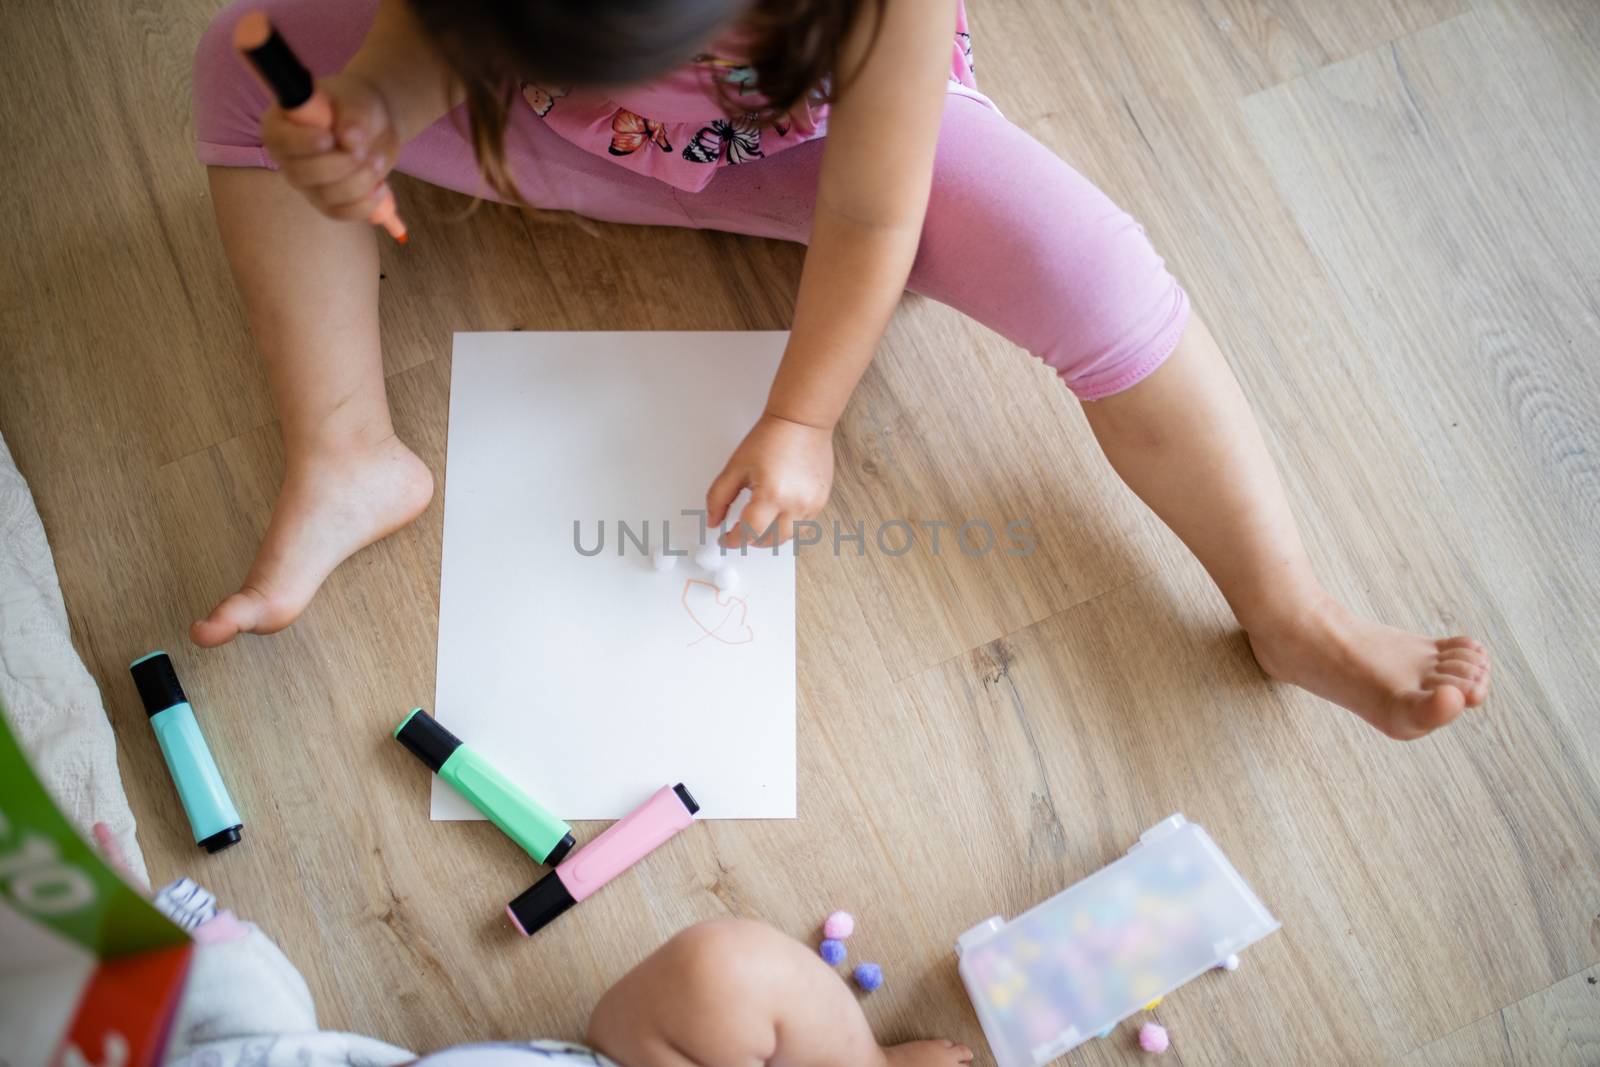 Landscape picture of a little girl in pink clothing sitting on a wooden floor and doing sums on a paper sheet with colorful textmarkers, and cotton balls alongside her baby sibling